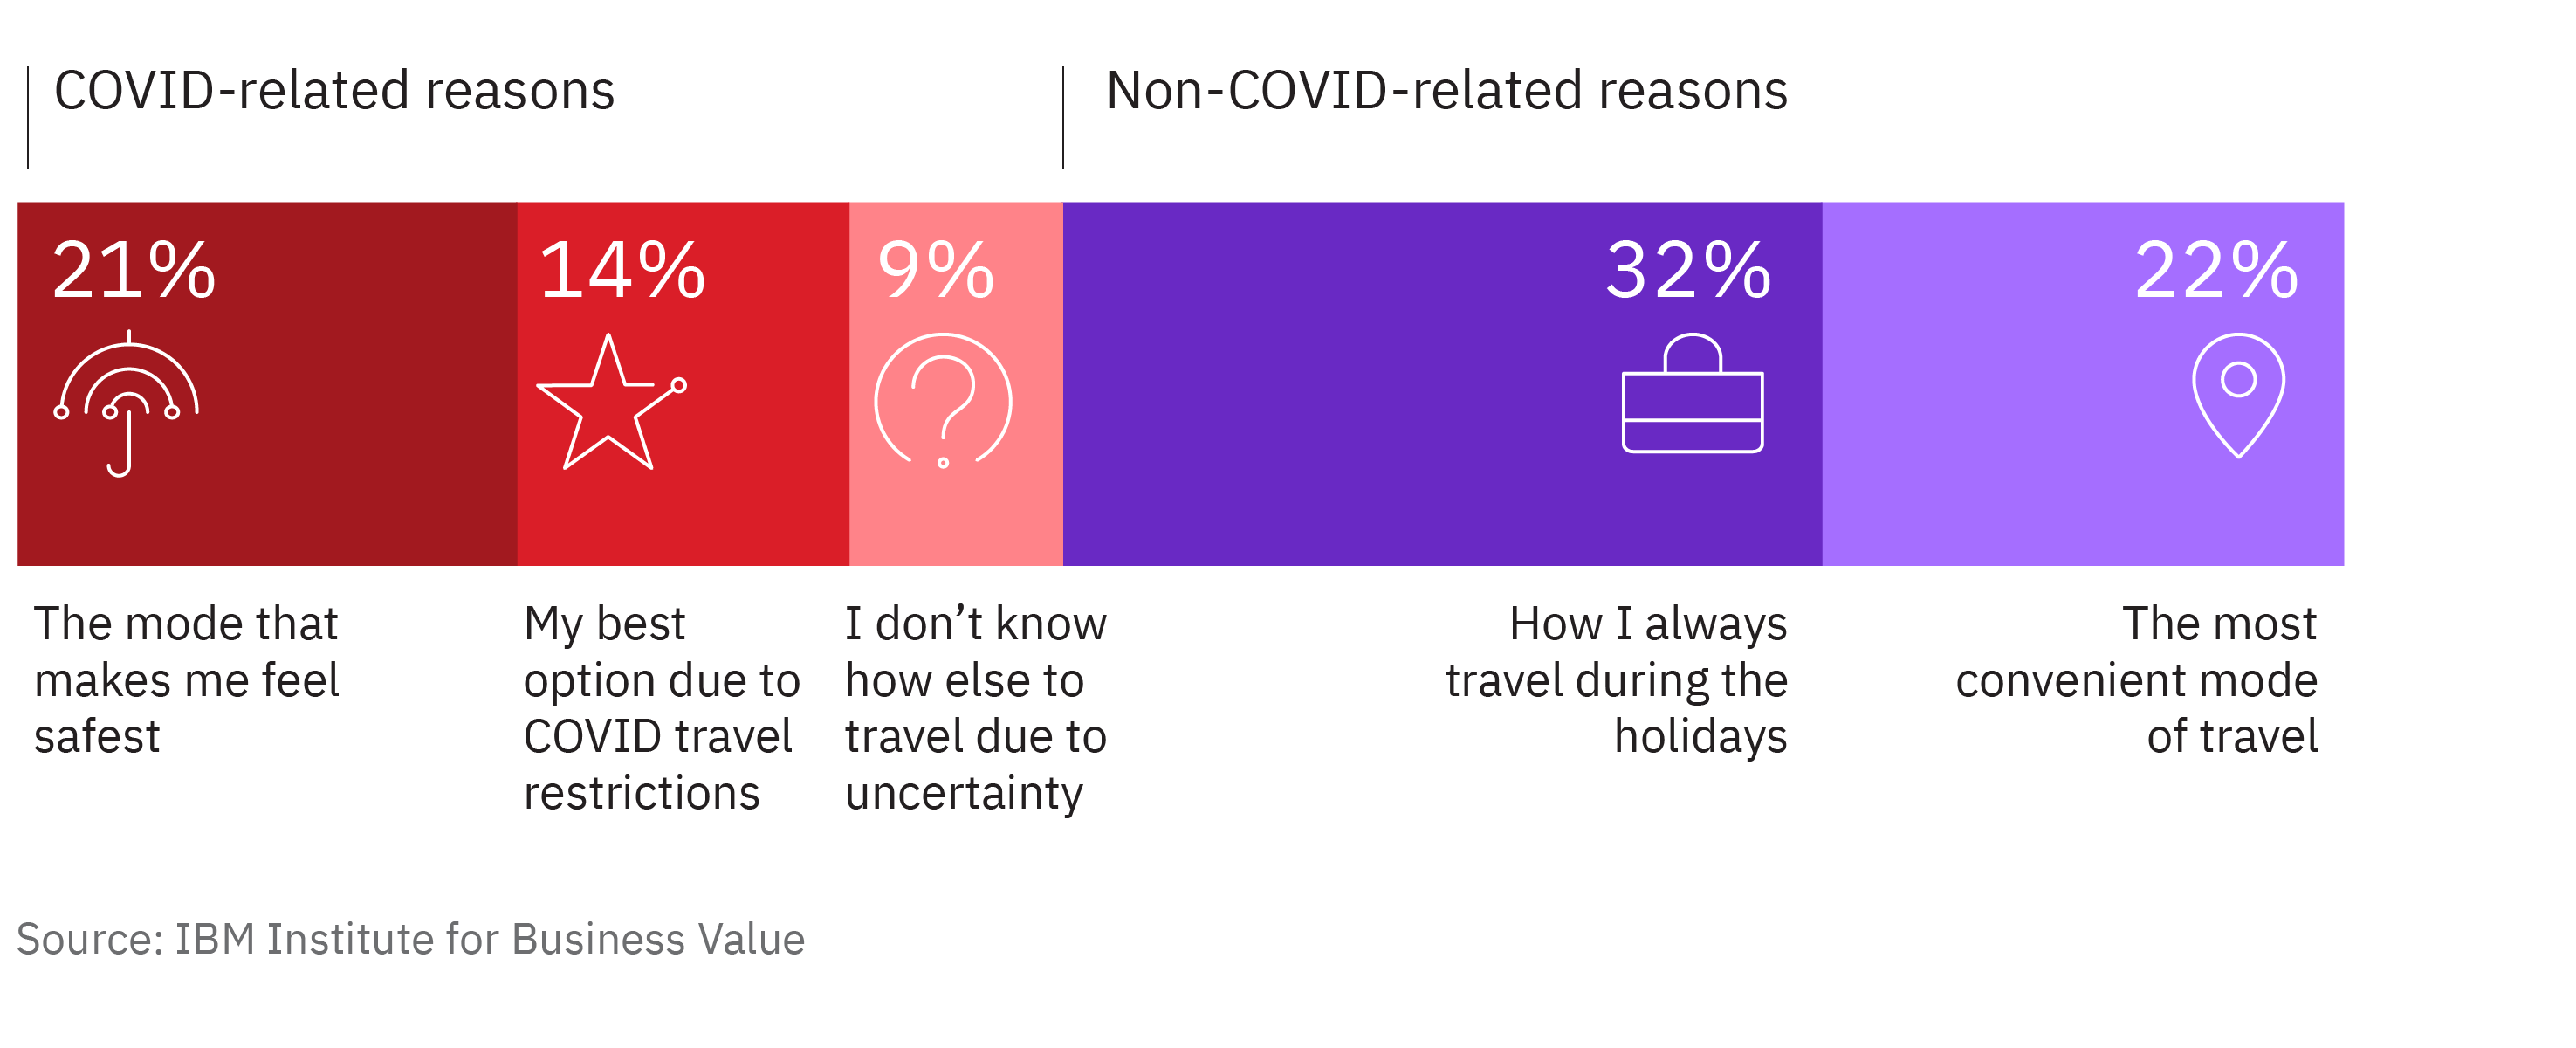 COVID-19 isn’t the only factor influencing travel choices